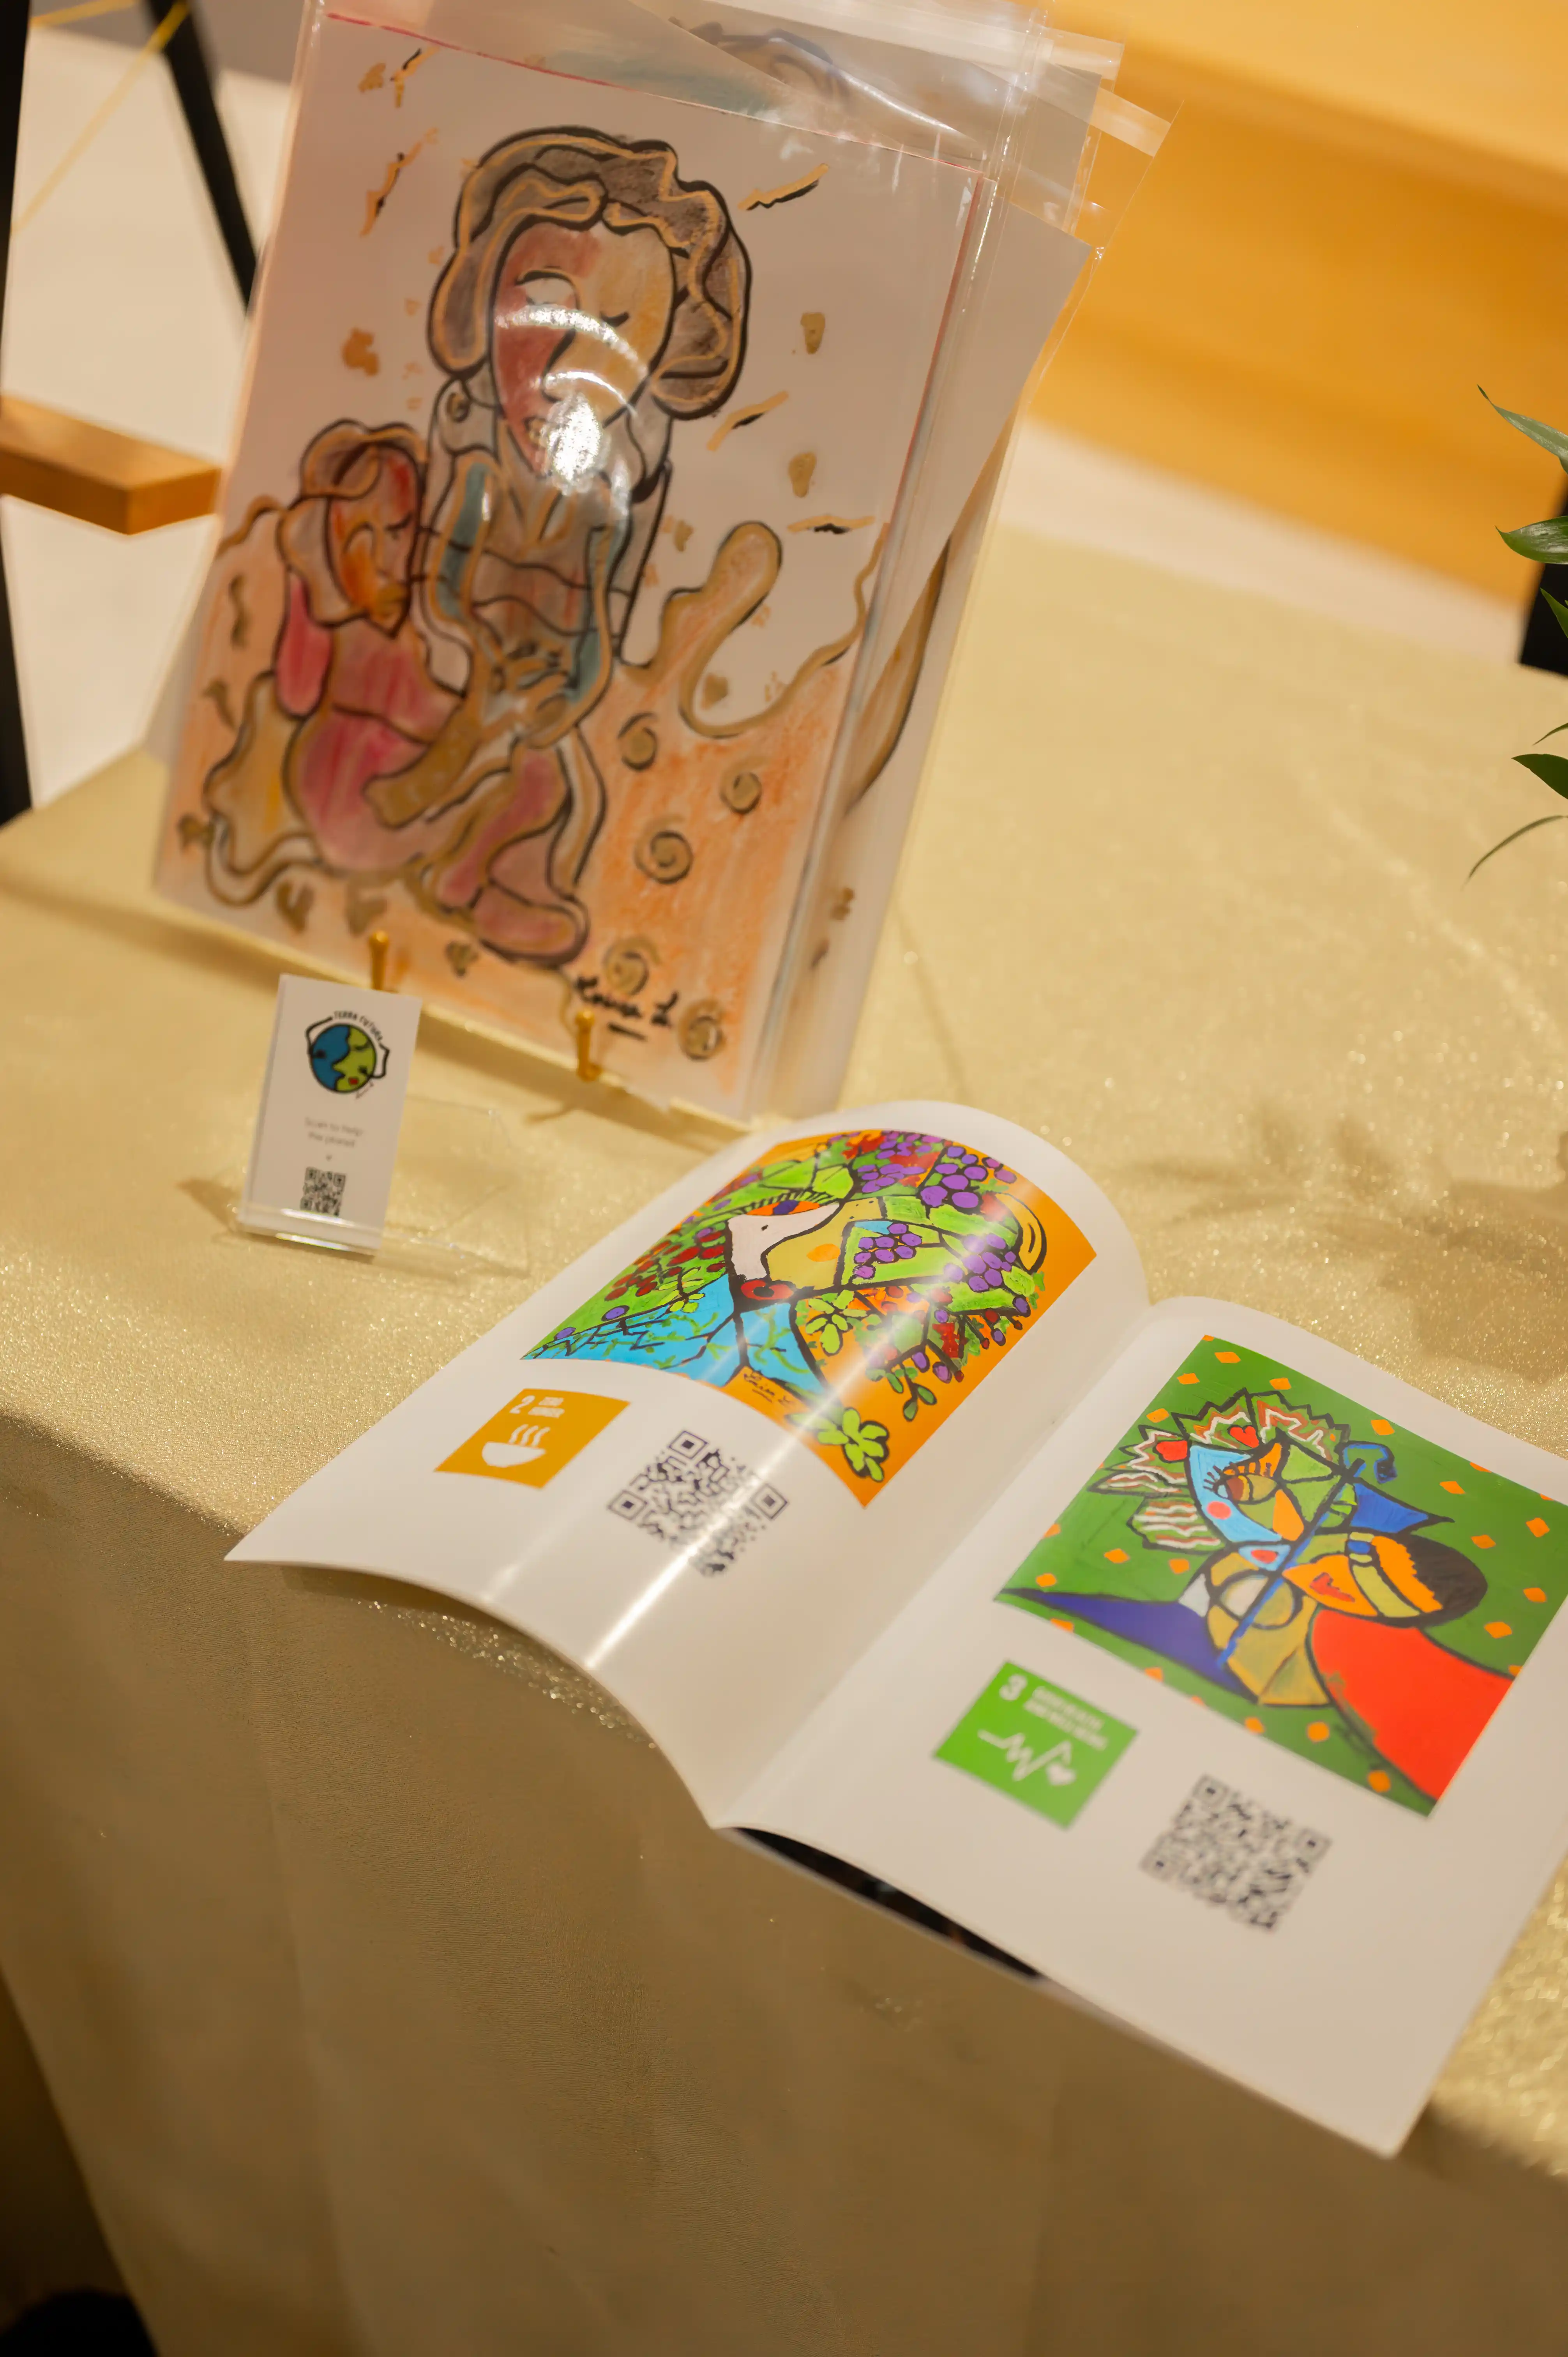 Alt: Coloring book opened to a page with vibrant, colored artwork on a table next to colored pencils, with another coloring book standing upright in the background.